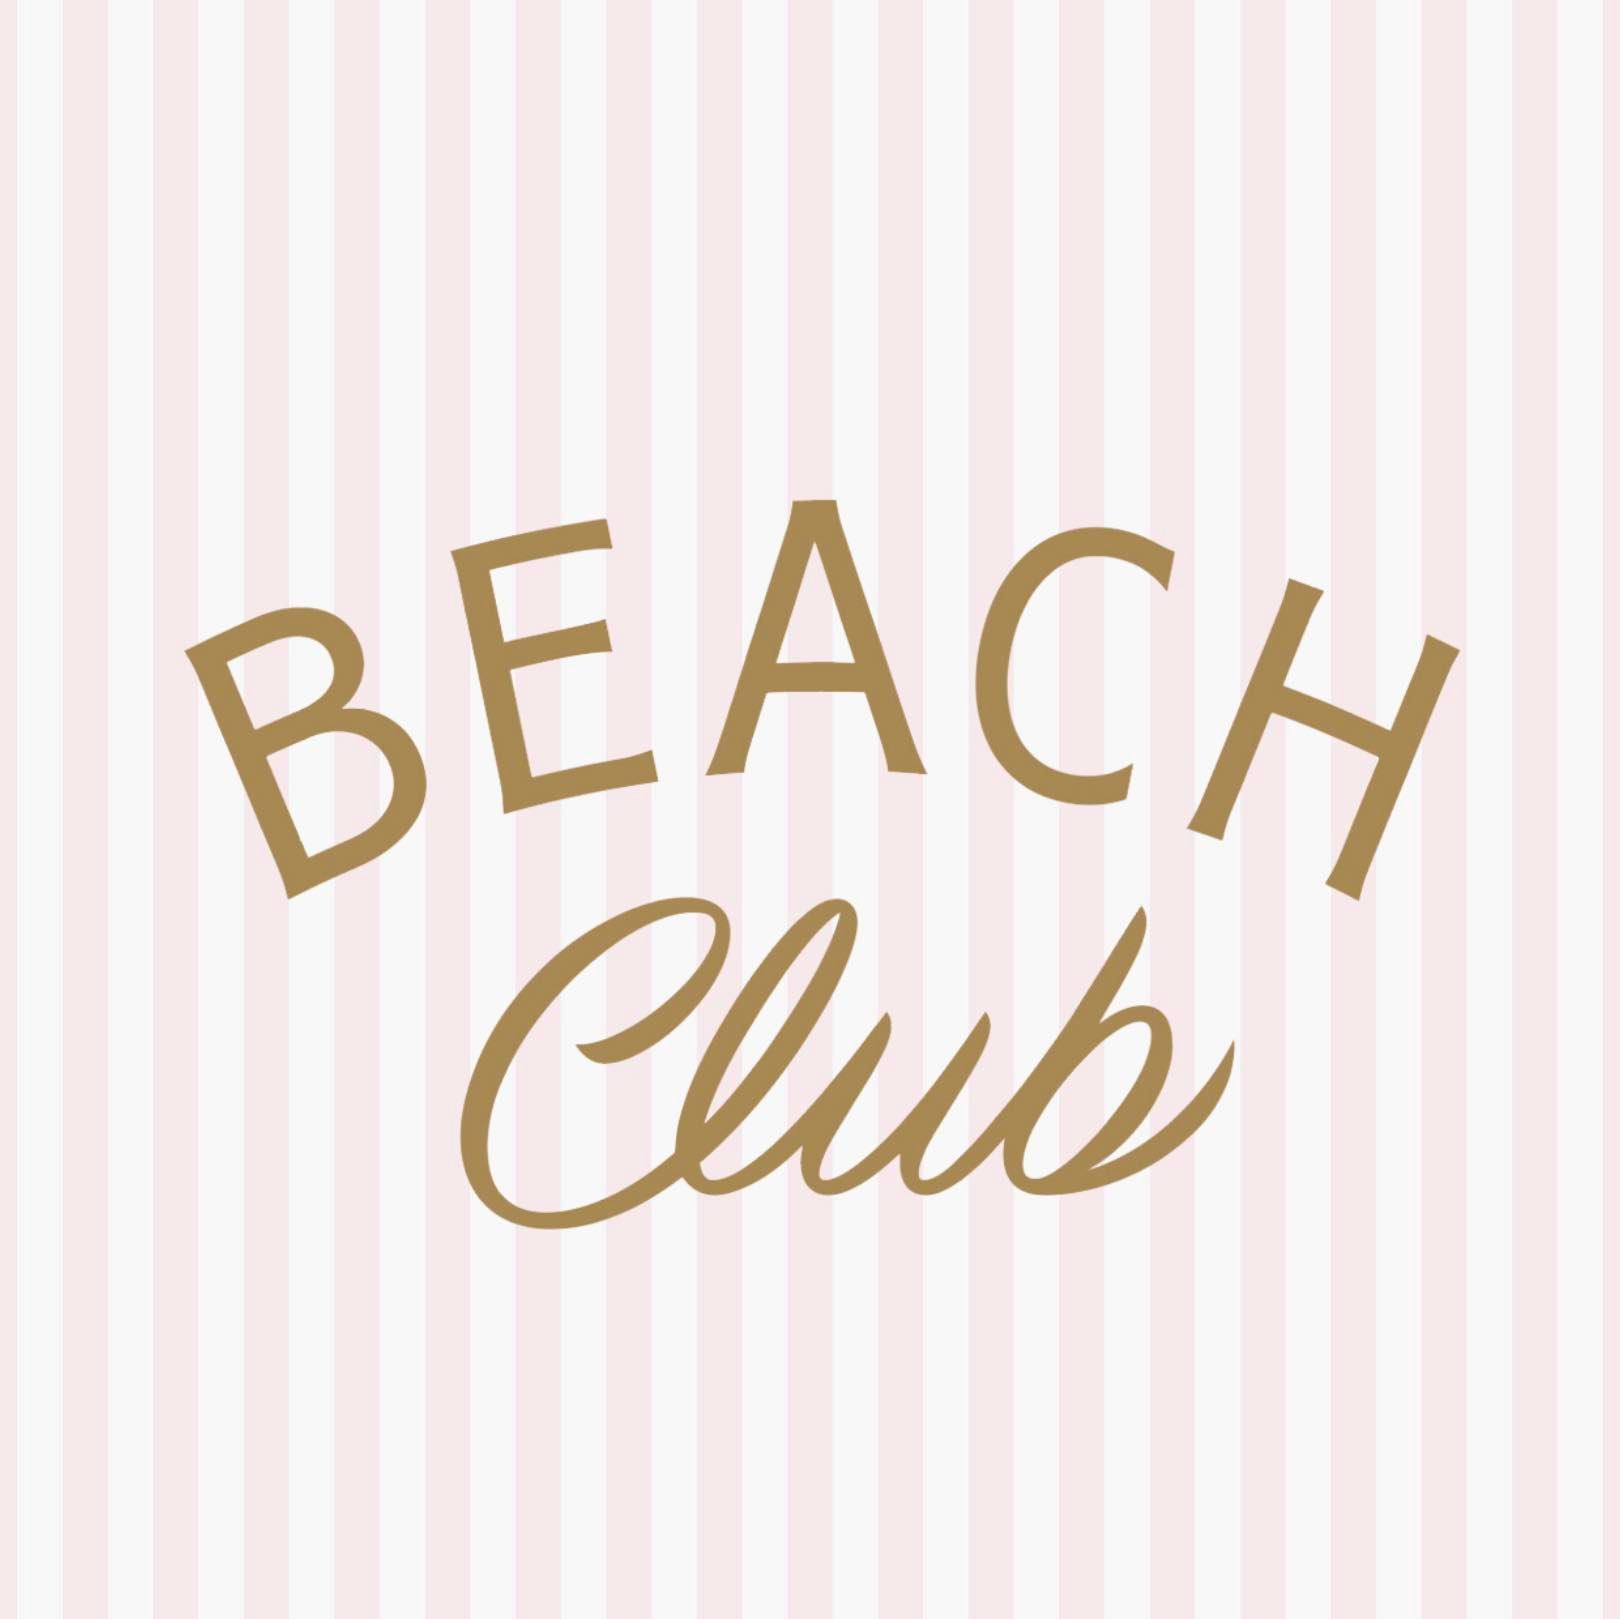 Beach Club Seltzer shares their issues distributing drinks